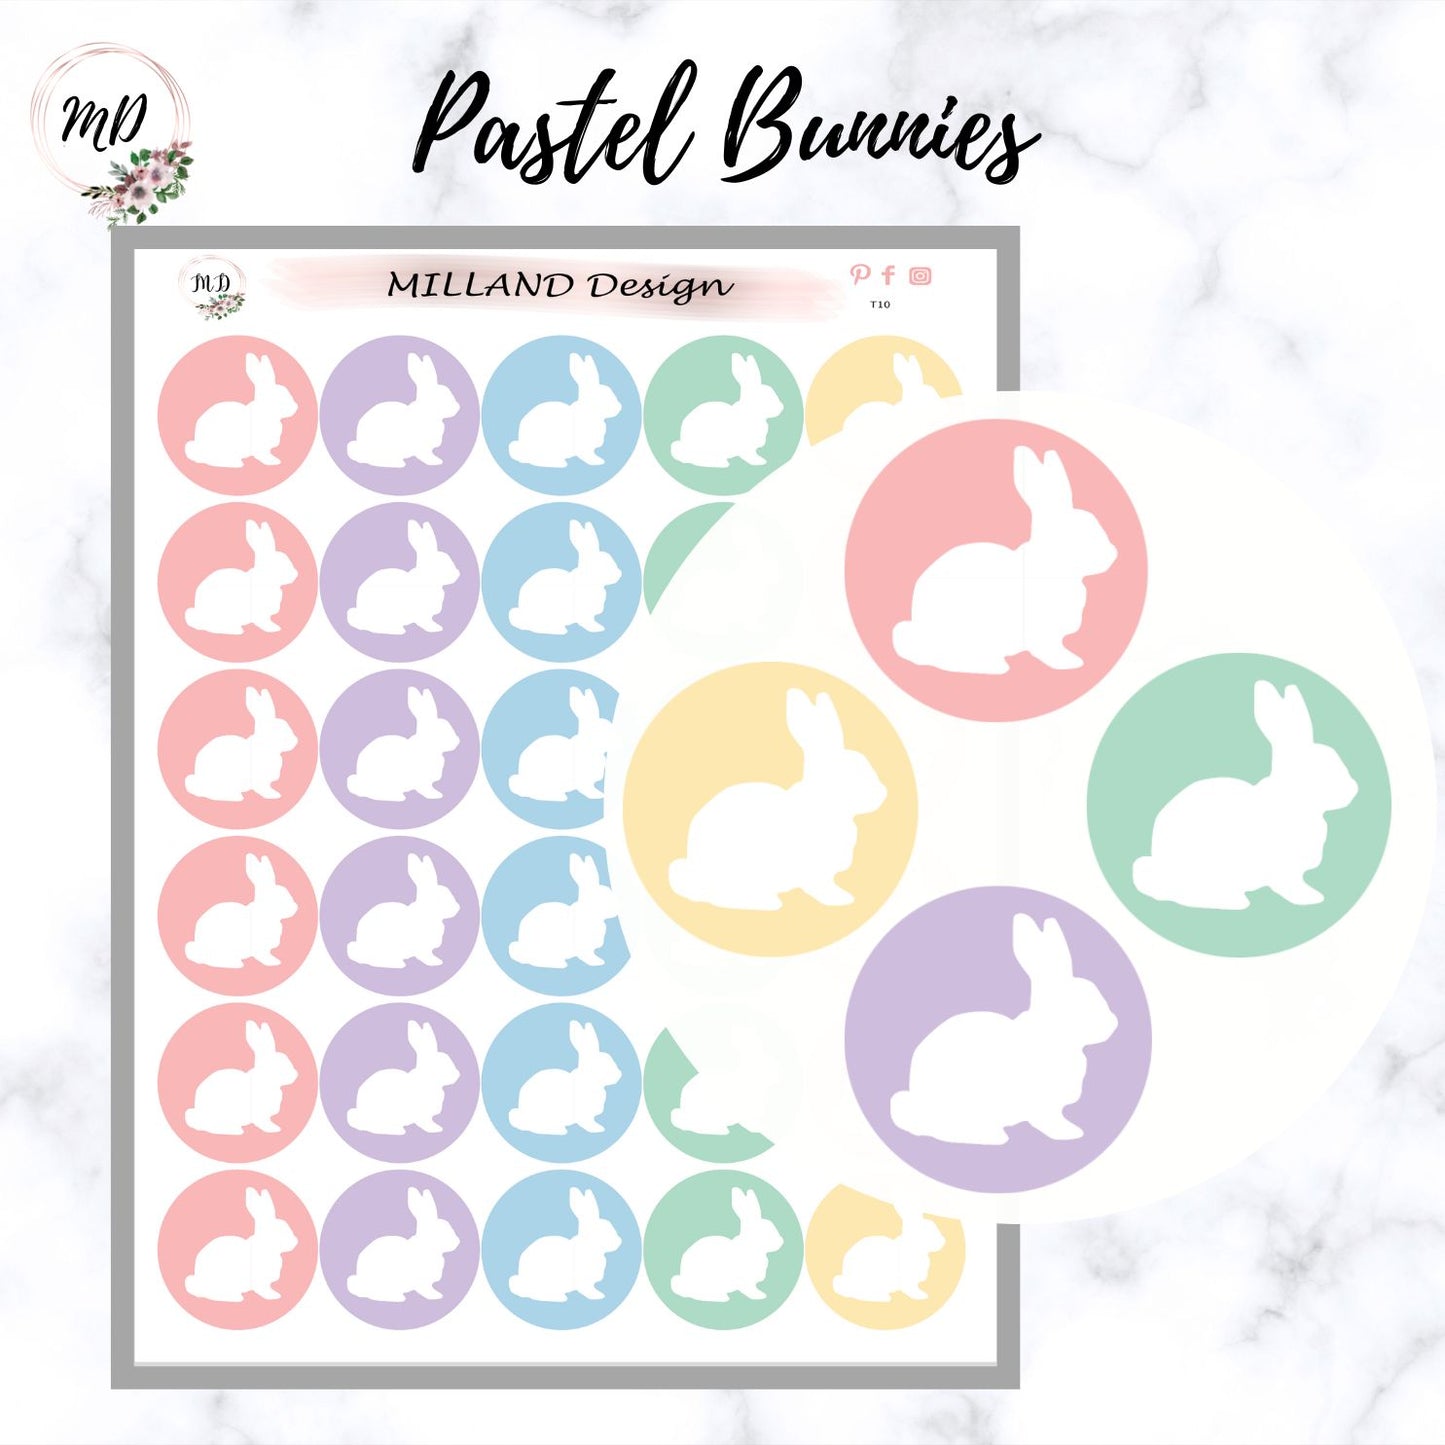 Pastel Bunnies Easter stickers sheet for planners and teachers